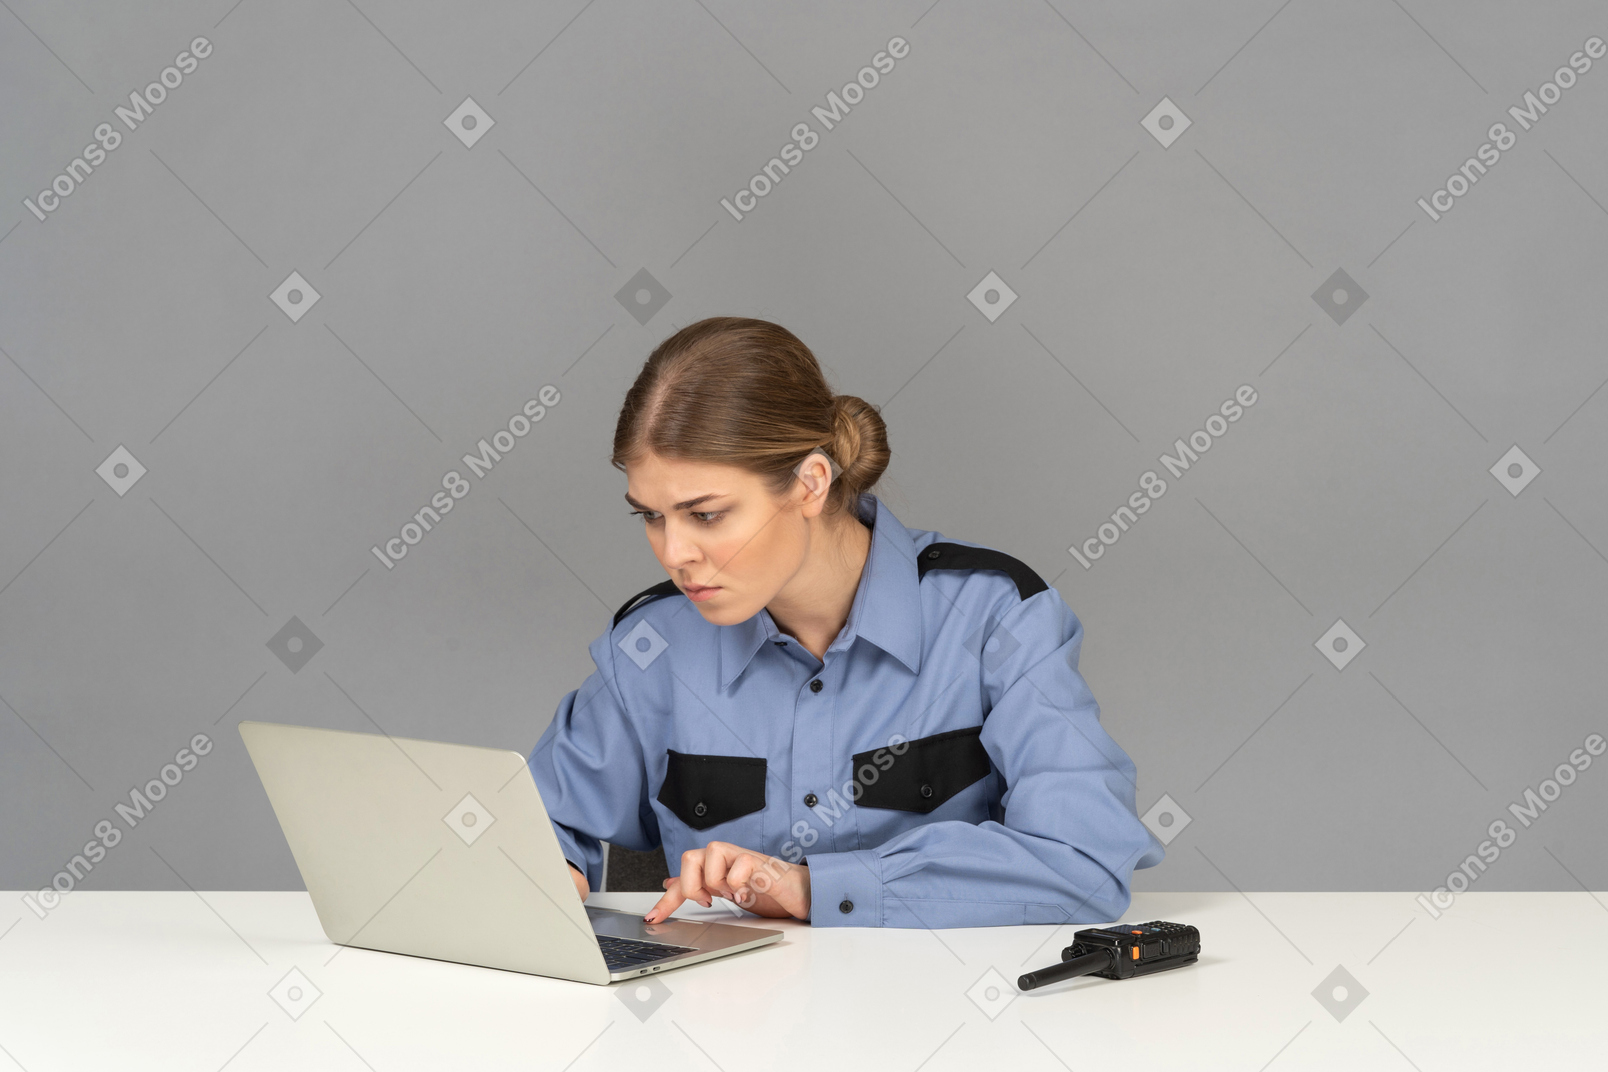 A thoughtful female security guard looking at a laptop